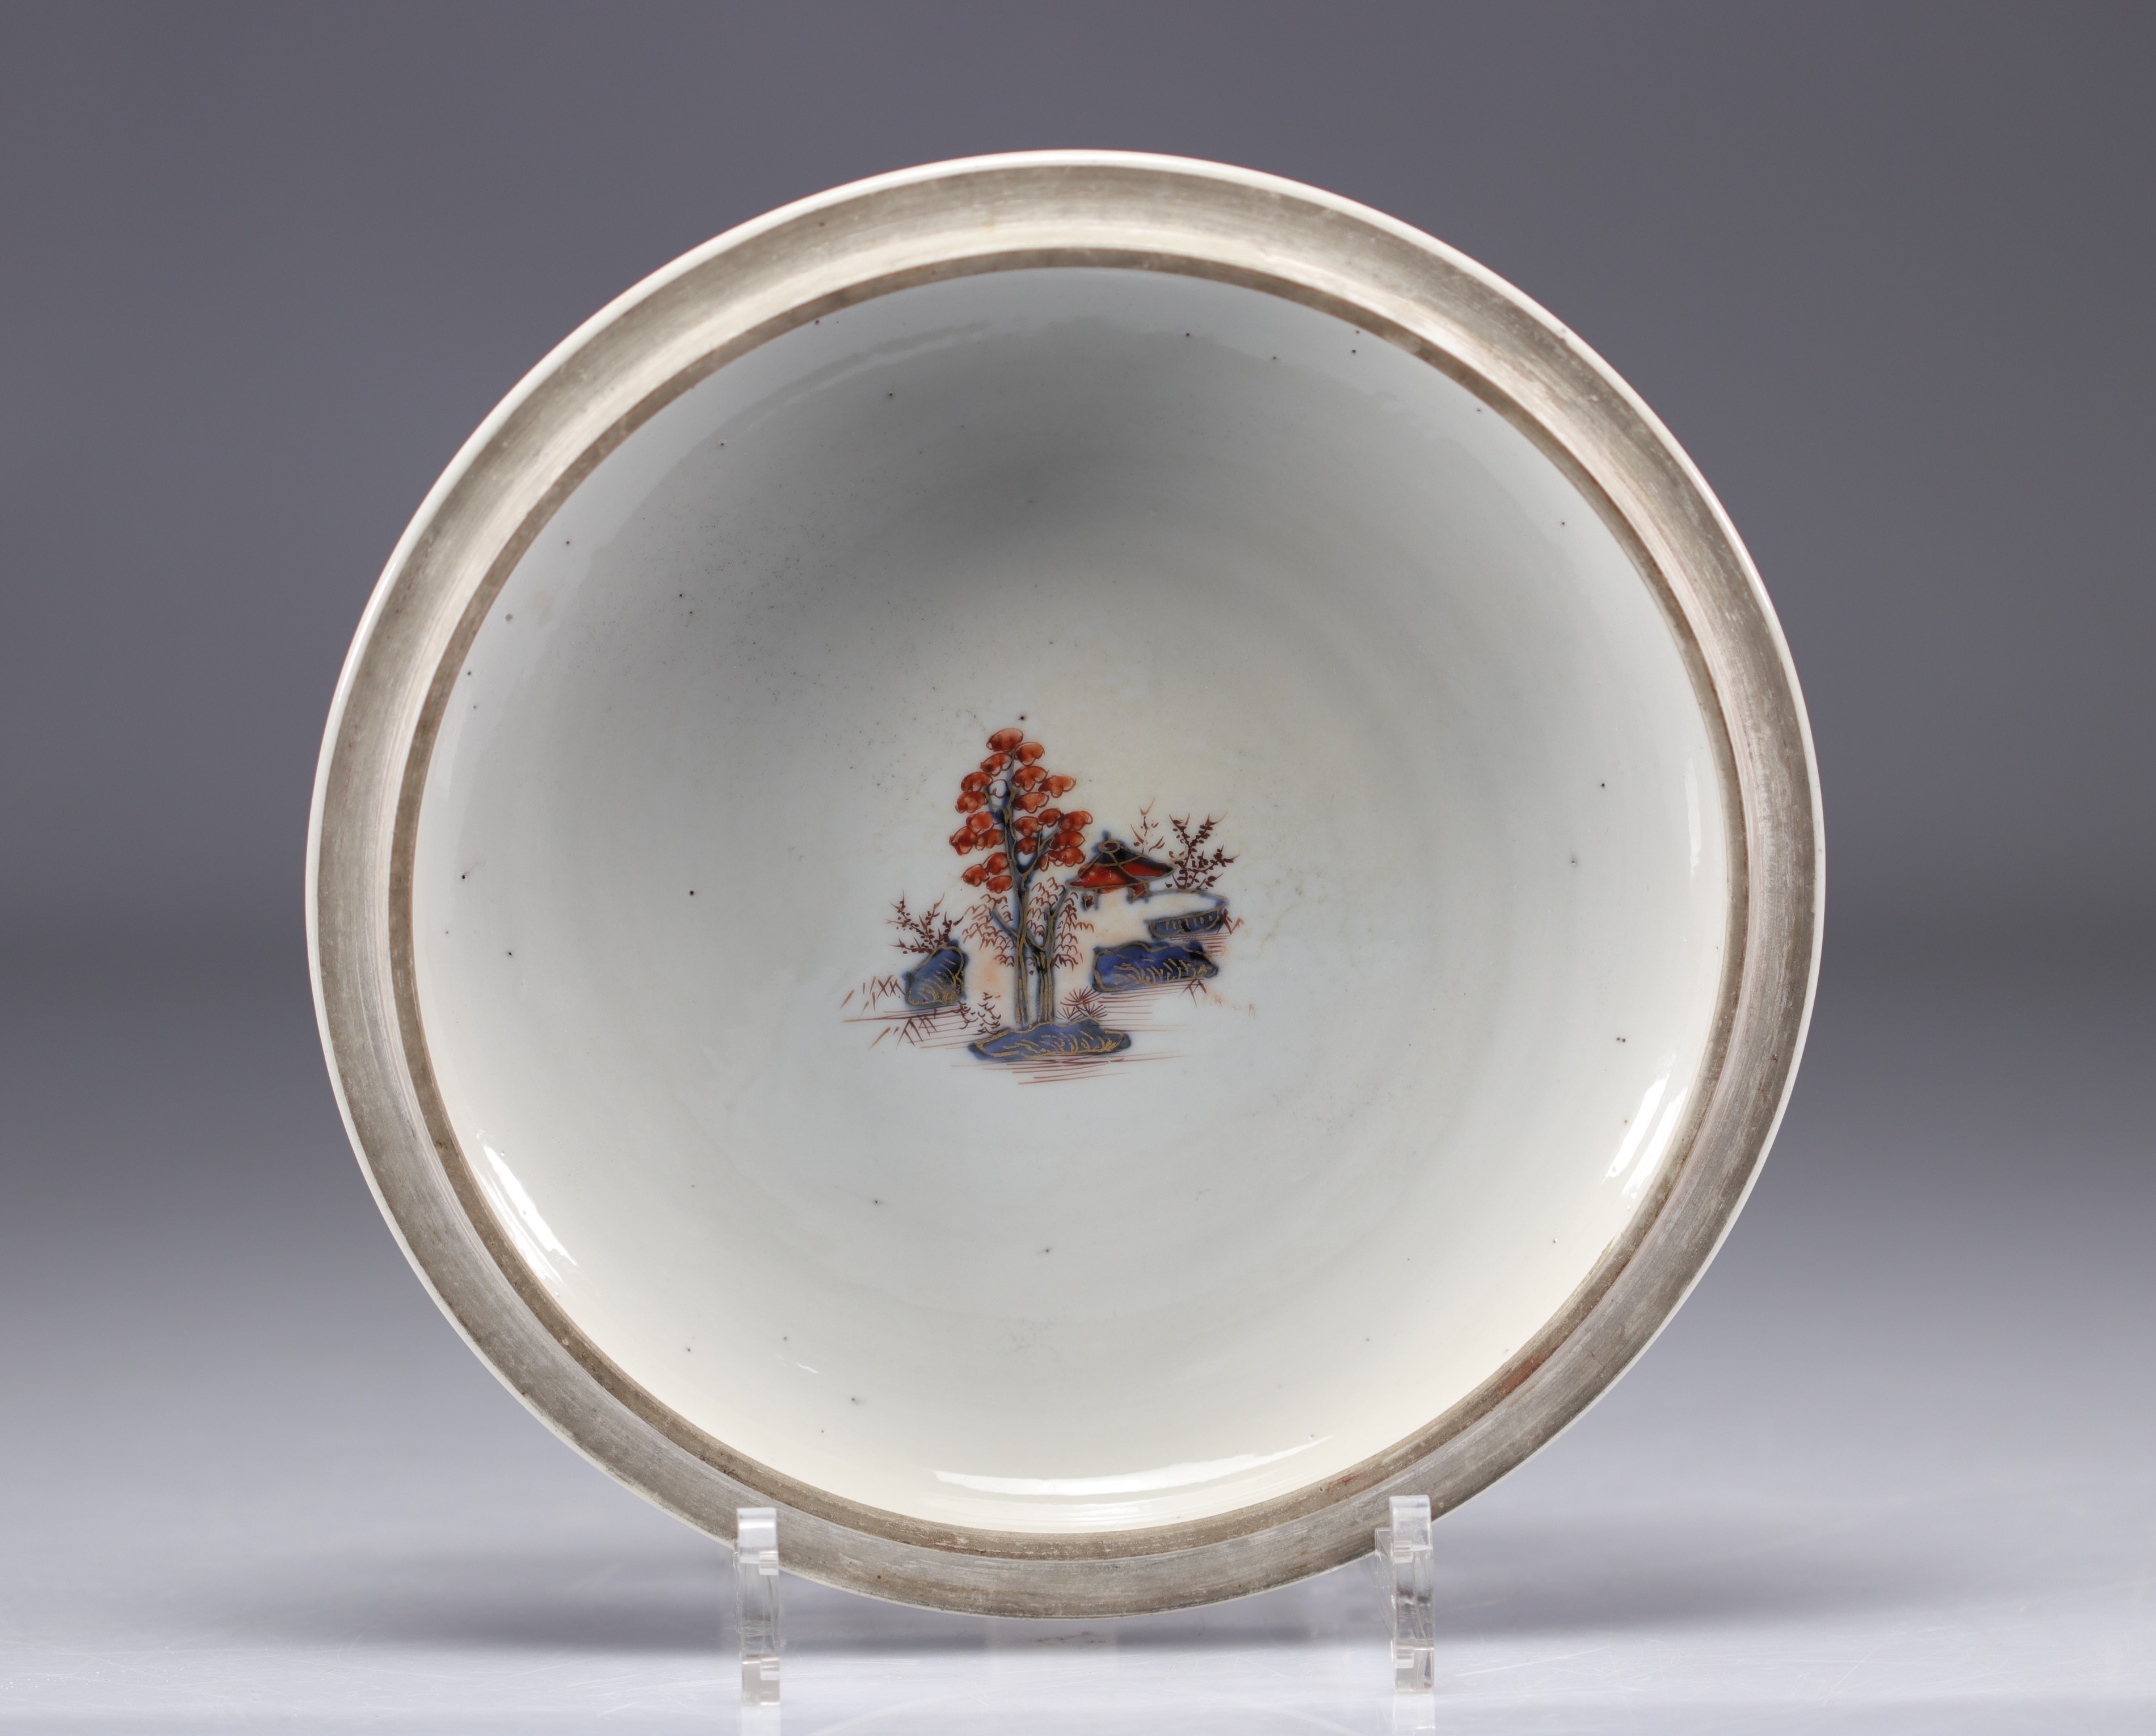 Covered dish in chinese porcelain decorated with landscapes on a white background from 18th century - Image 6 of 6